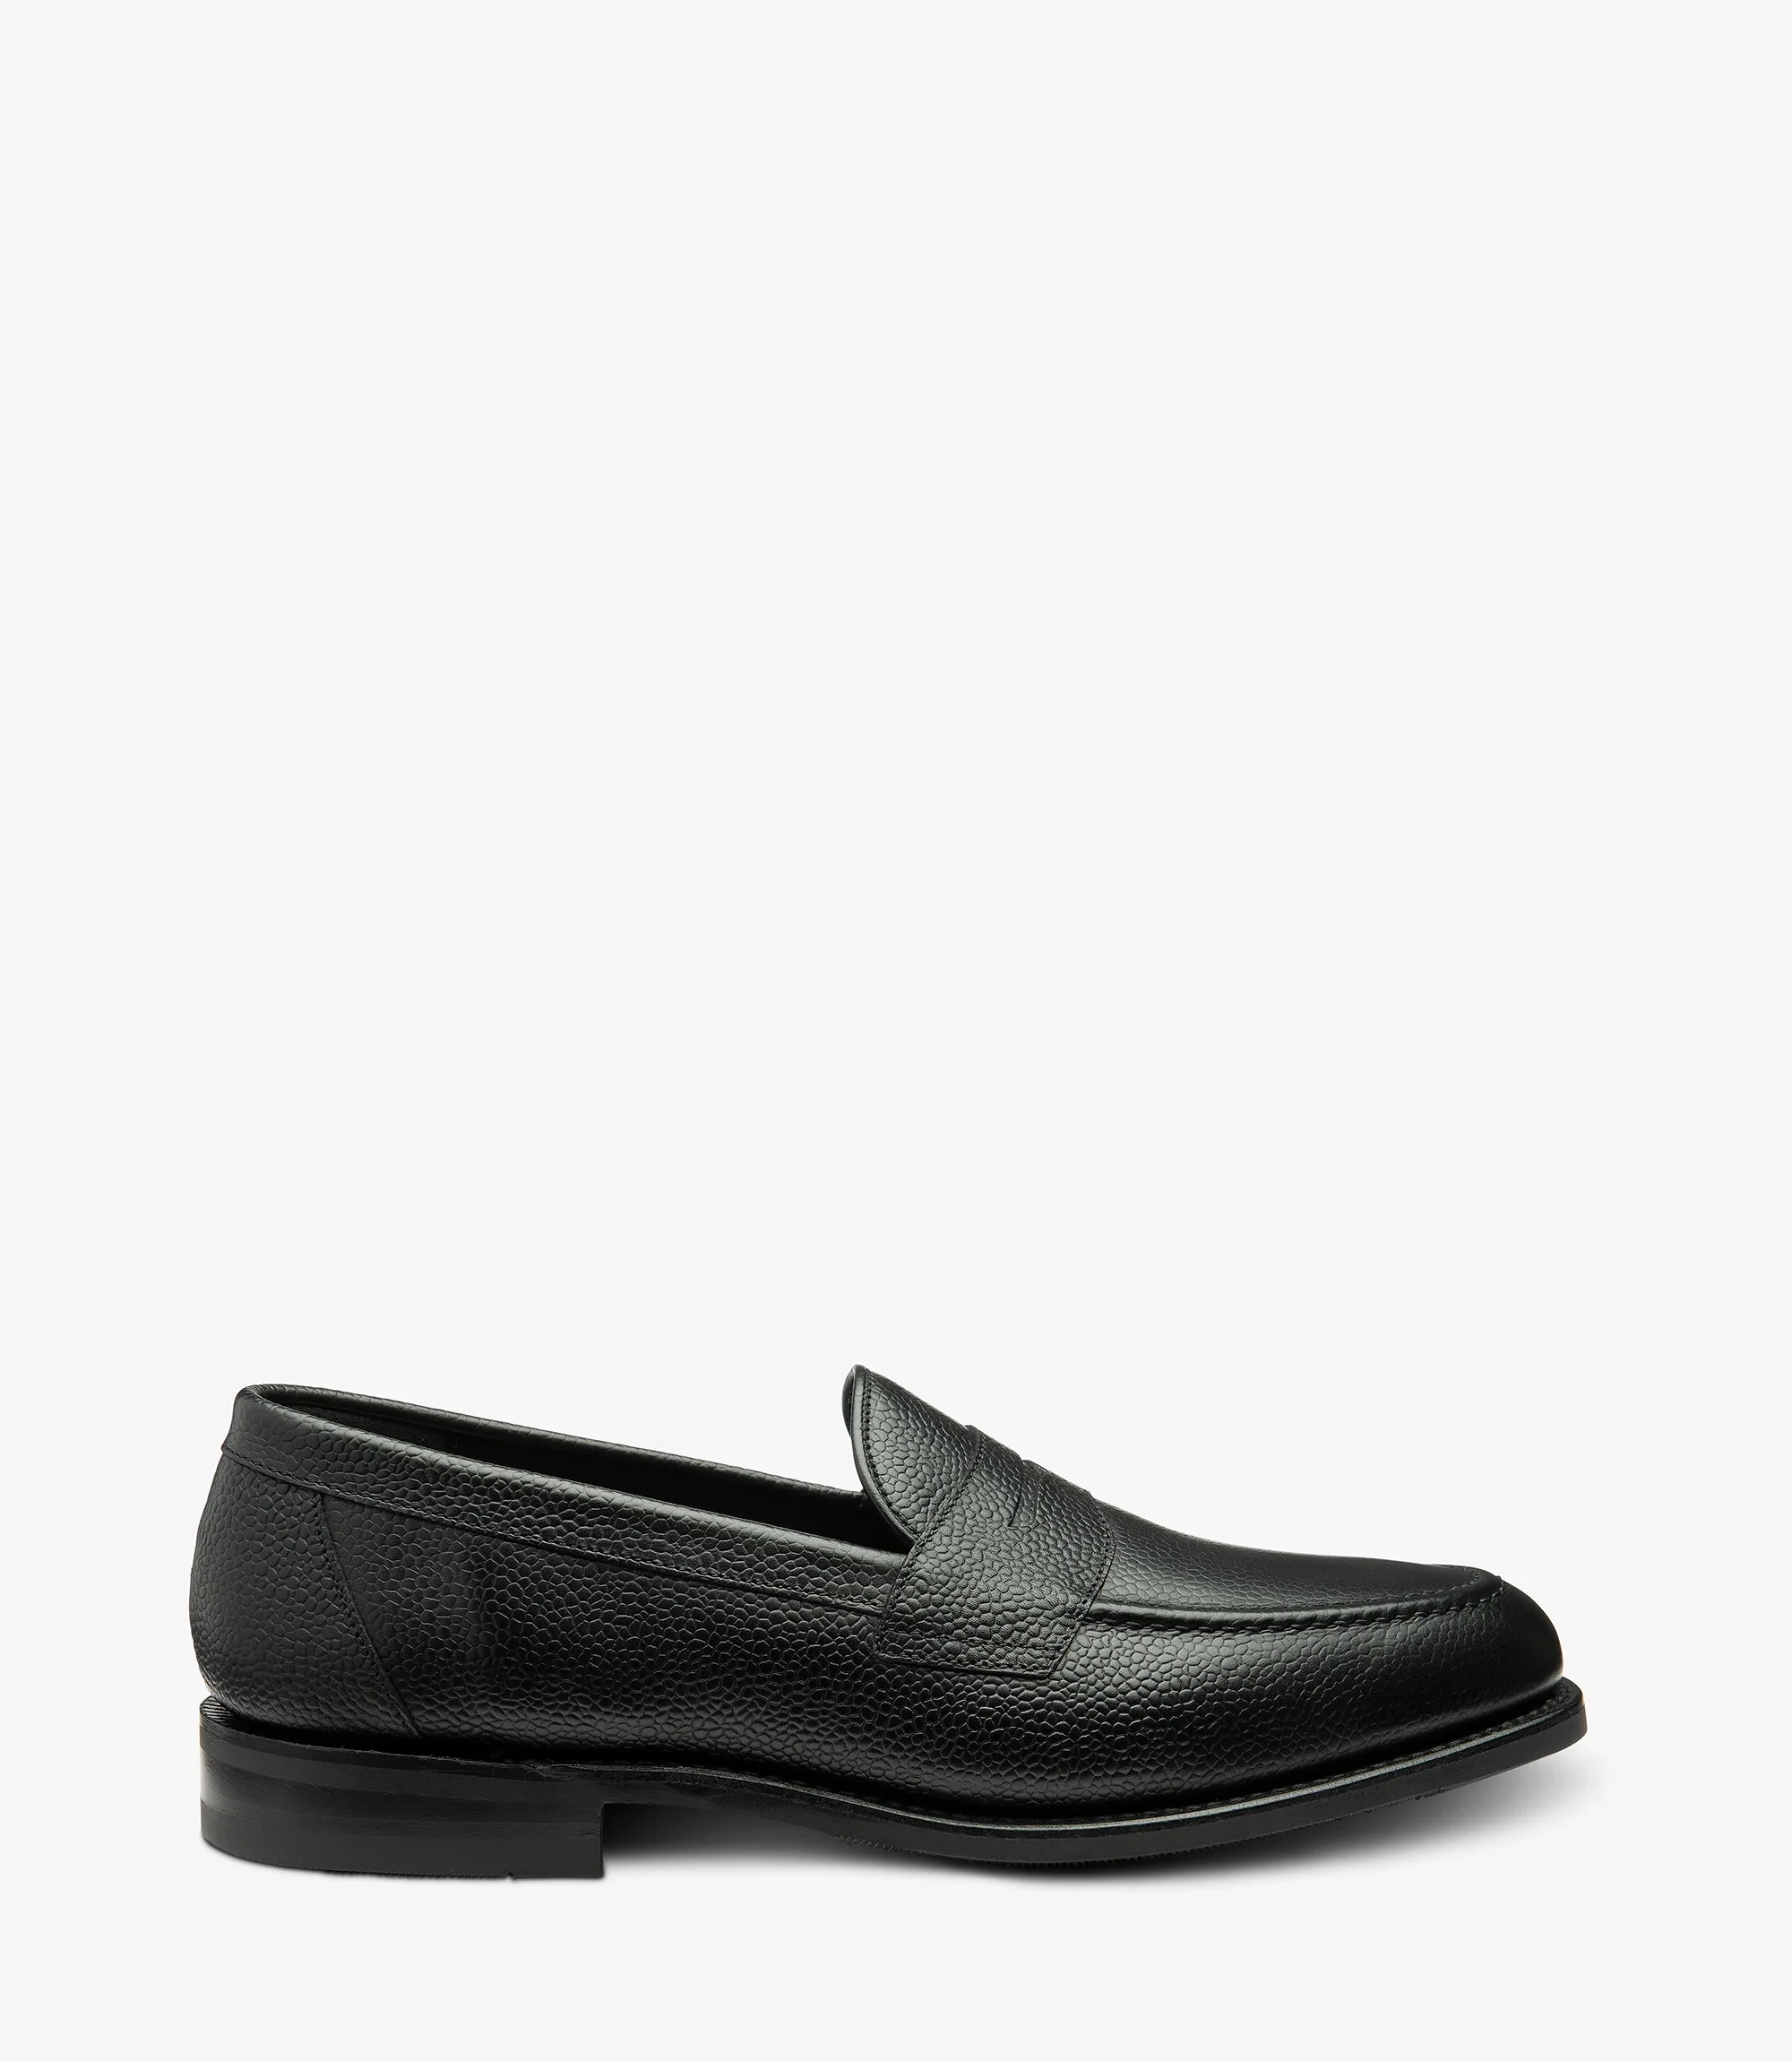 Men's Shoes & Boots | Imperial loafer | Loake Shoemakers